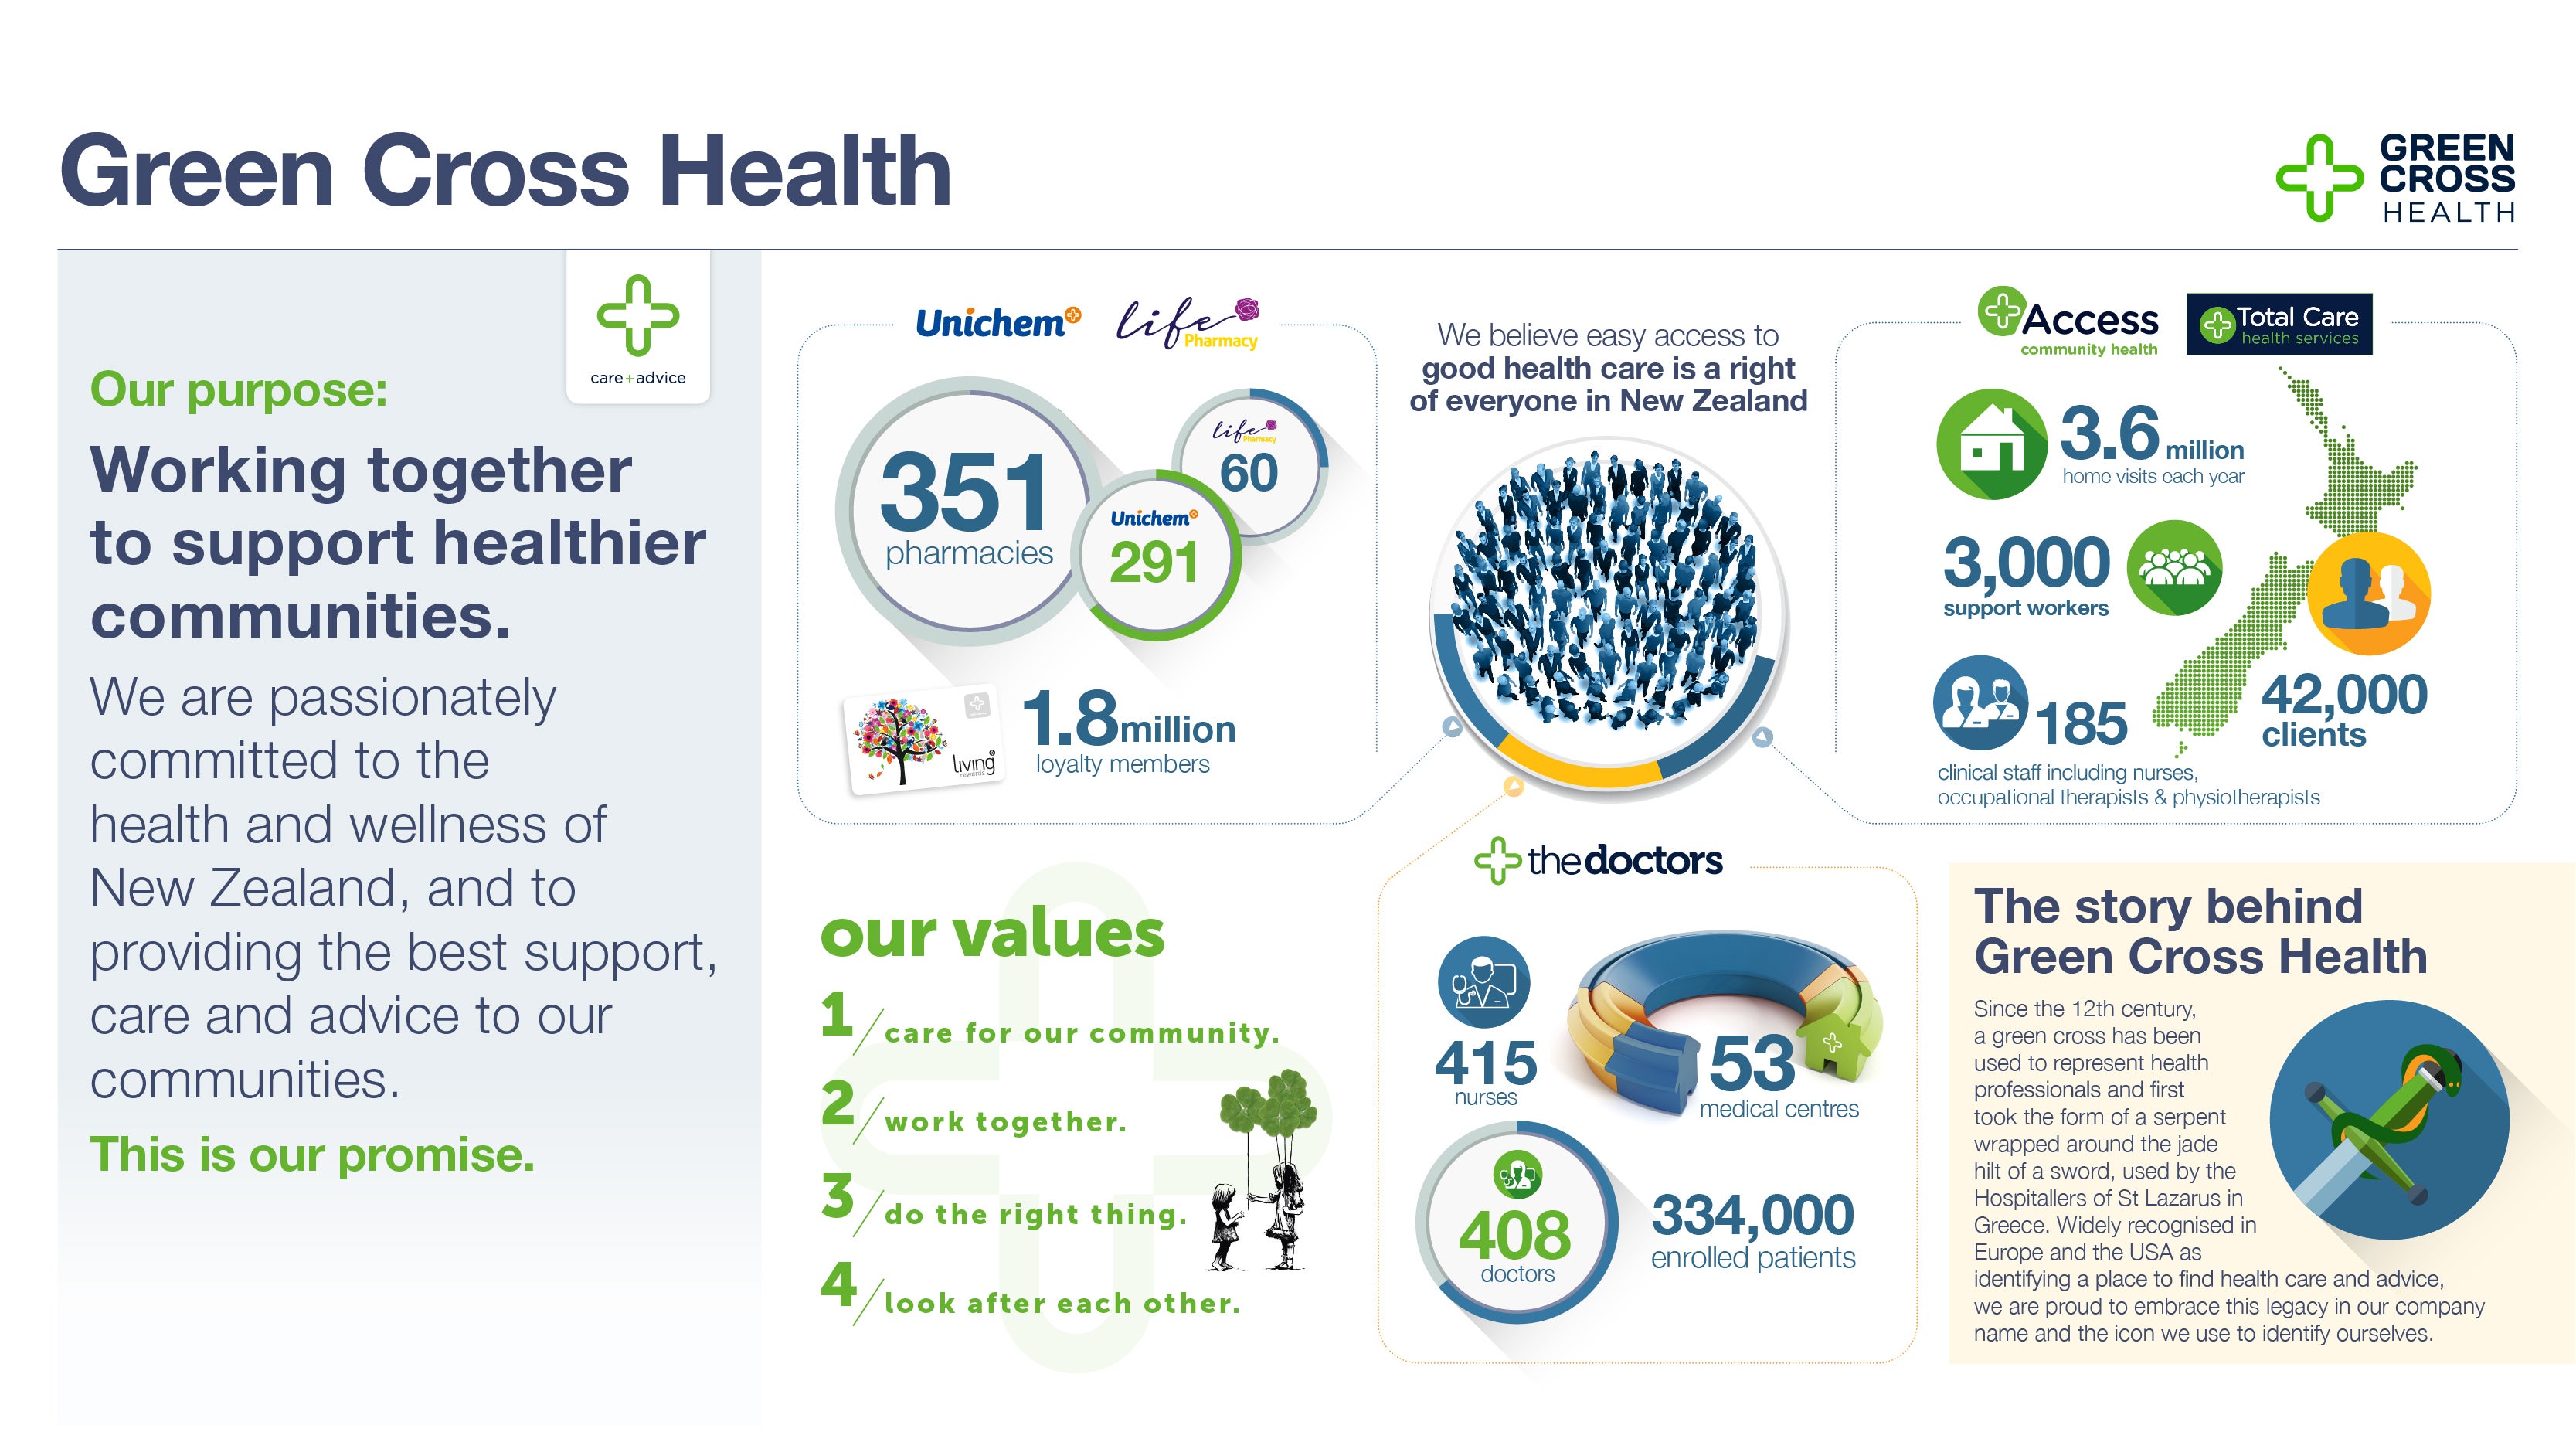 Green Cross Health | Our purpose: Working together to support healthier communities. | We are passionately committed to the health and wellness of New Zealand, and to providing the best support, care and advice ot our communities. | This is our promise. | Unichem | life Pharmacy | 351 pharmacies | Unichem 291 | Life Pharmacy 60 | 1.8 million loyalty members | We believe easy access to good health care is a right of everyone in New Zealand. | Access community health | Total Care health services | 3.6 million home visits each year | 3,000 support workers | 42,000 clients | 185 clinical staff including nurses, occupational therapists & physiotherapists | our values. 1/ care for our commnity. 2/ work together. 3/ do the right thing. 4/ look after each other. | the doctors | 415 nurses | 53 medical centres | 408 doctors | 334,000 enrolled patience. | The story behind Green Cross Health | Since the 12th century, a green cross has been used to represent health professionals and first took the form of a sepent wrapped around the jade hilt of a sword, used by the Hospitallers of St Lazarus in Greece. Widely recognised in Europe and the ISA as identifying a place to find health care and advice, we are proud to embrace this legacy in our company name and the icon we use to identify ourselves.